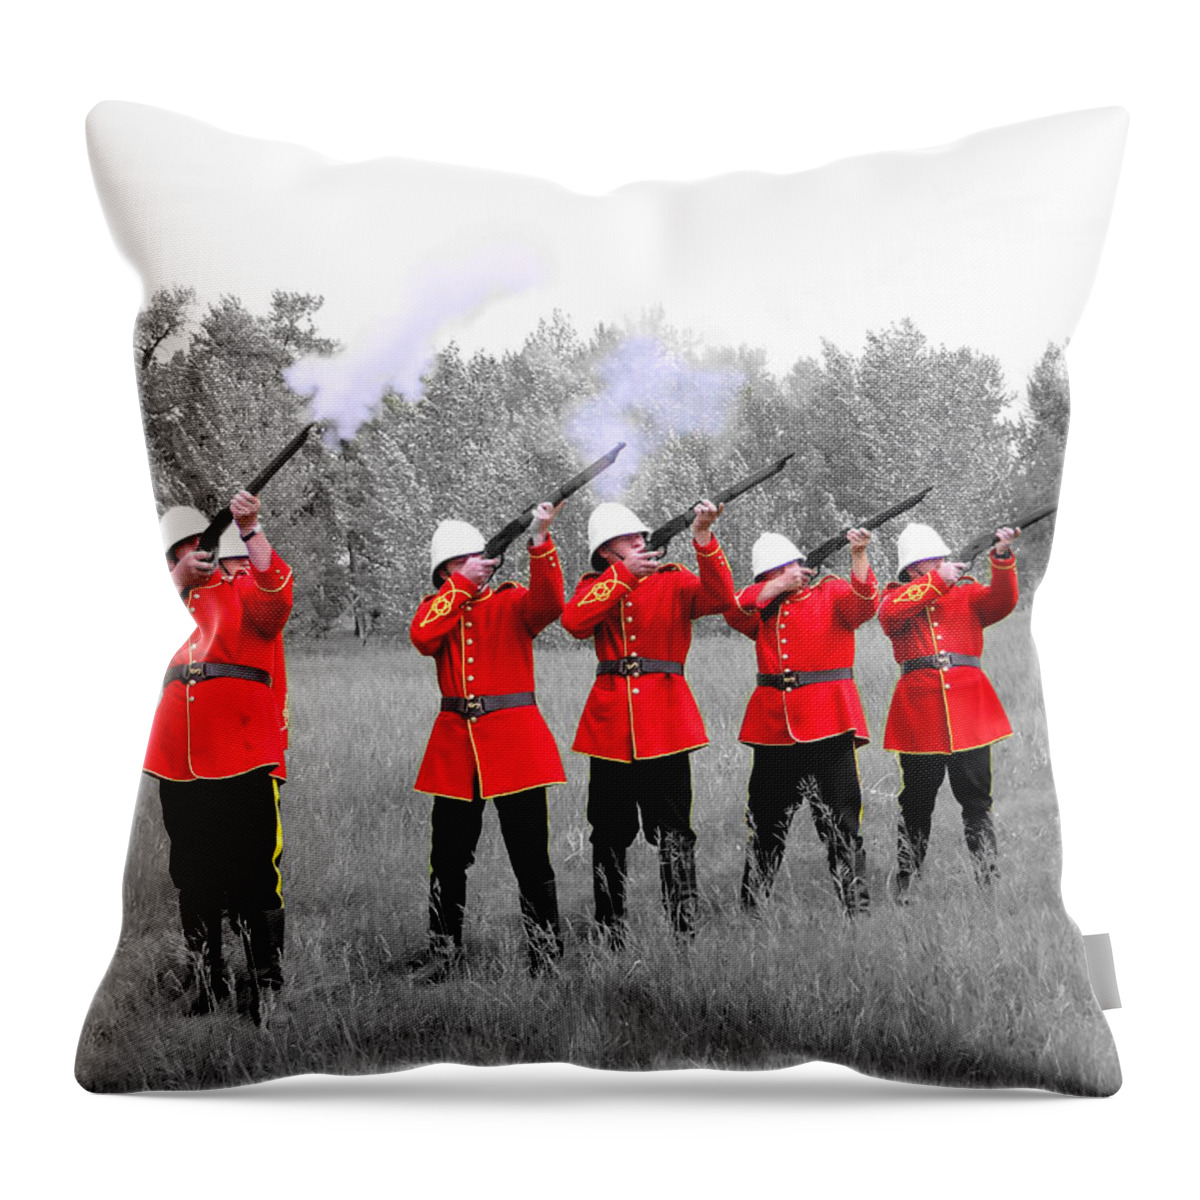 Al Bourassa Throw Pillow featuring the photograph The Volley by Al Bourassa